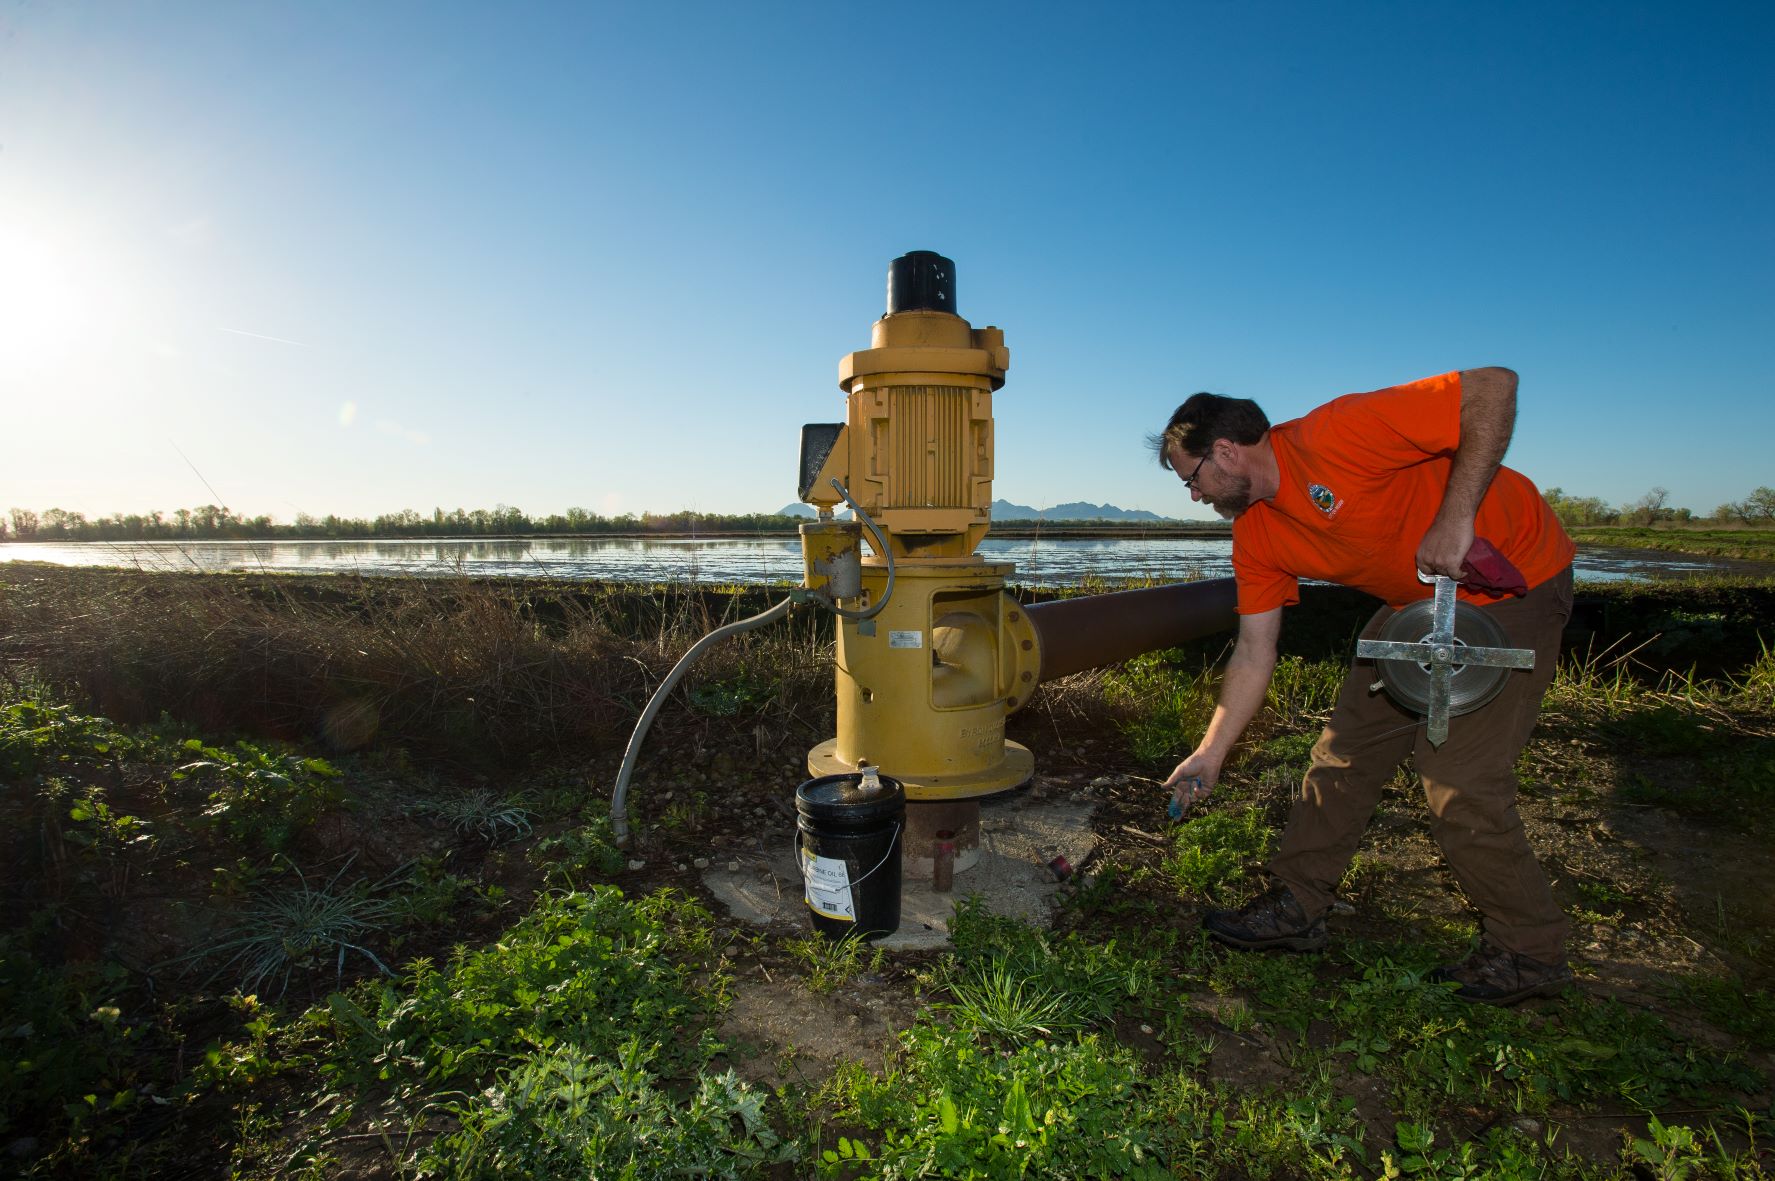 Efforts to protect groundwater are tested by drought